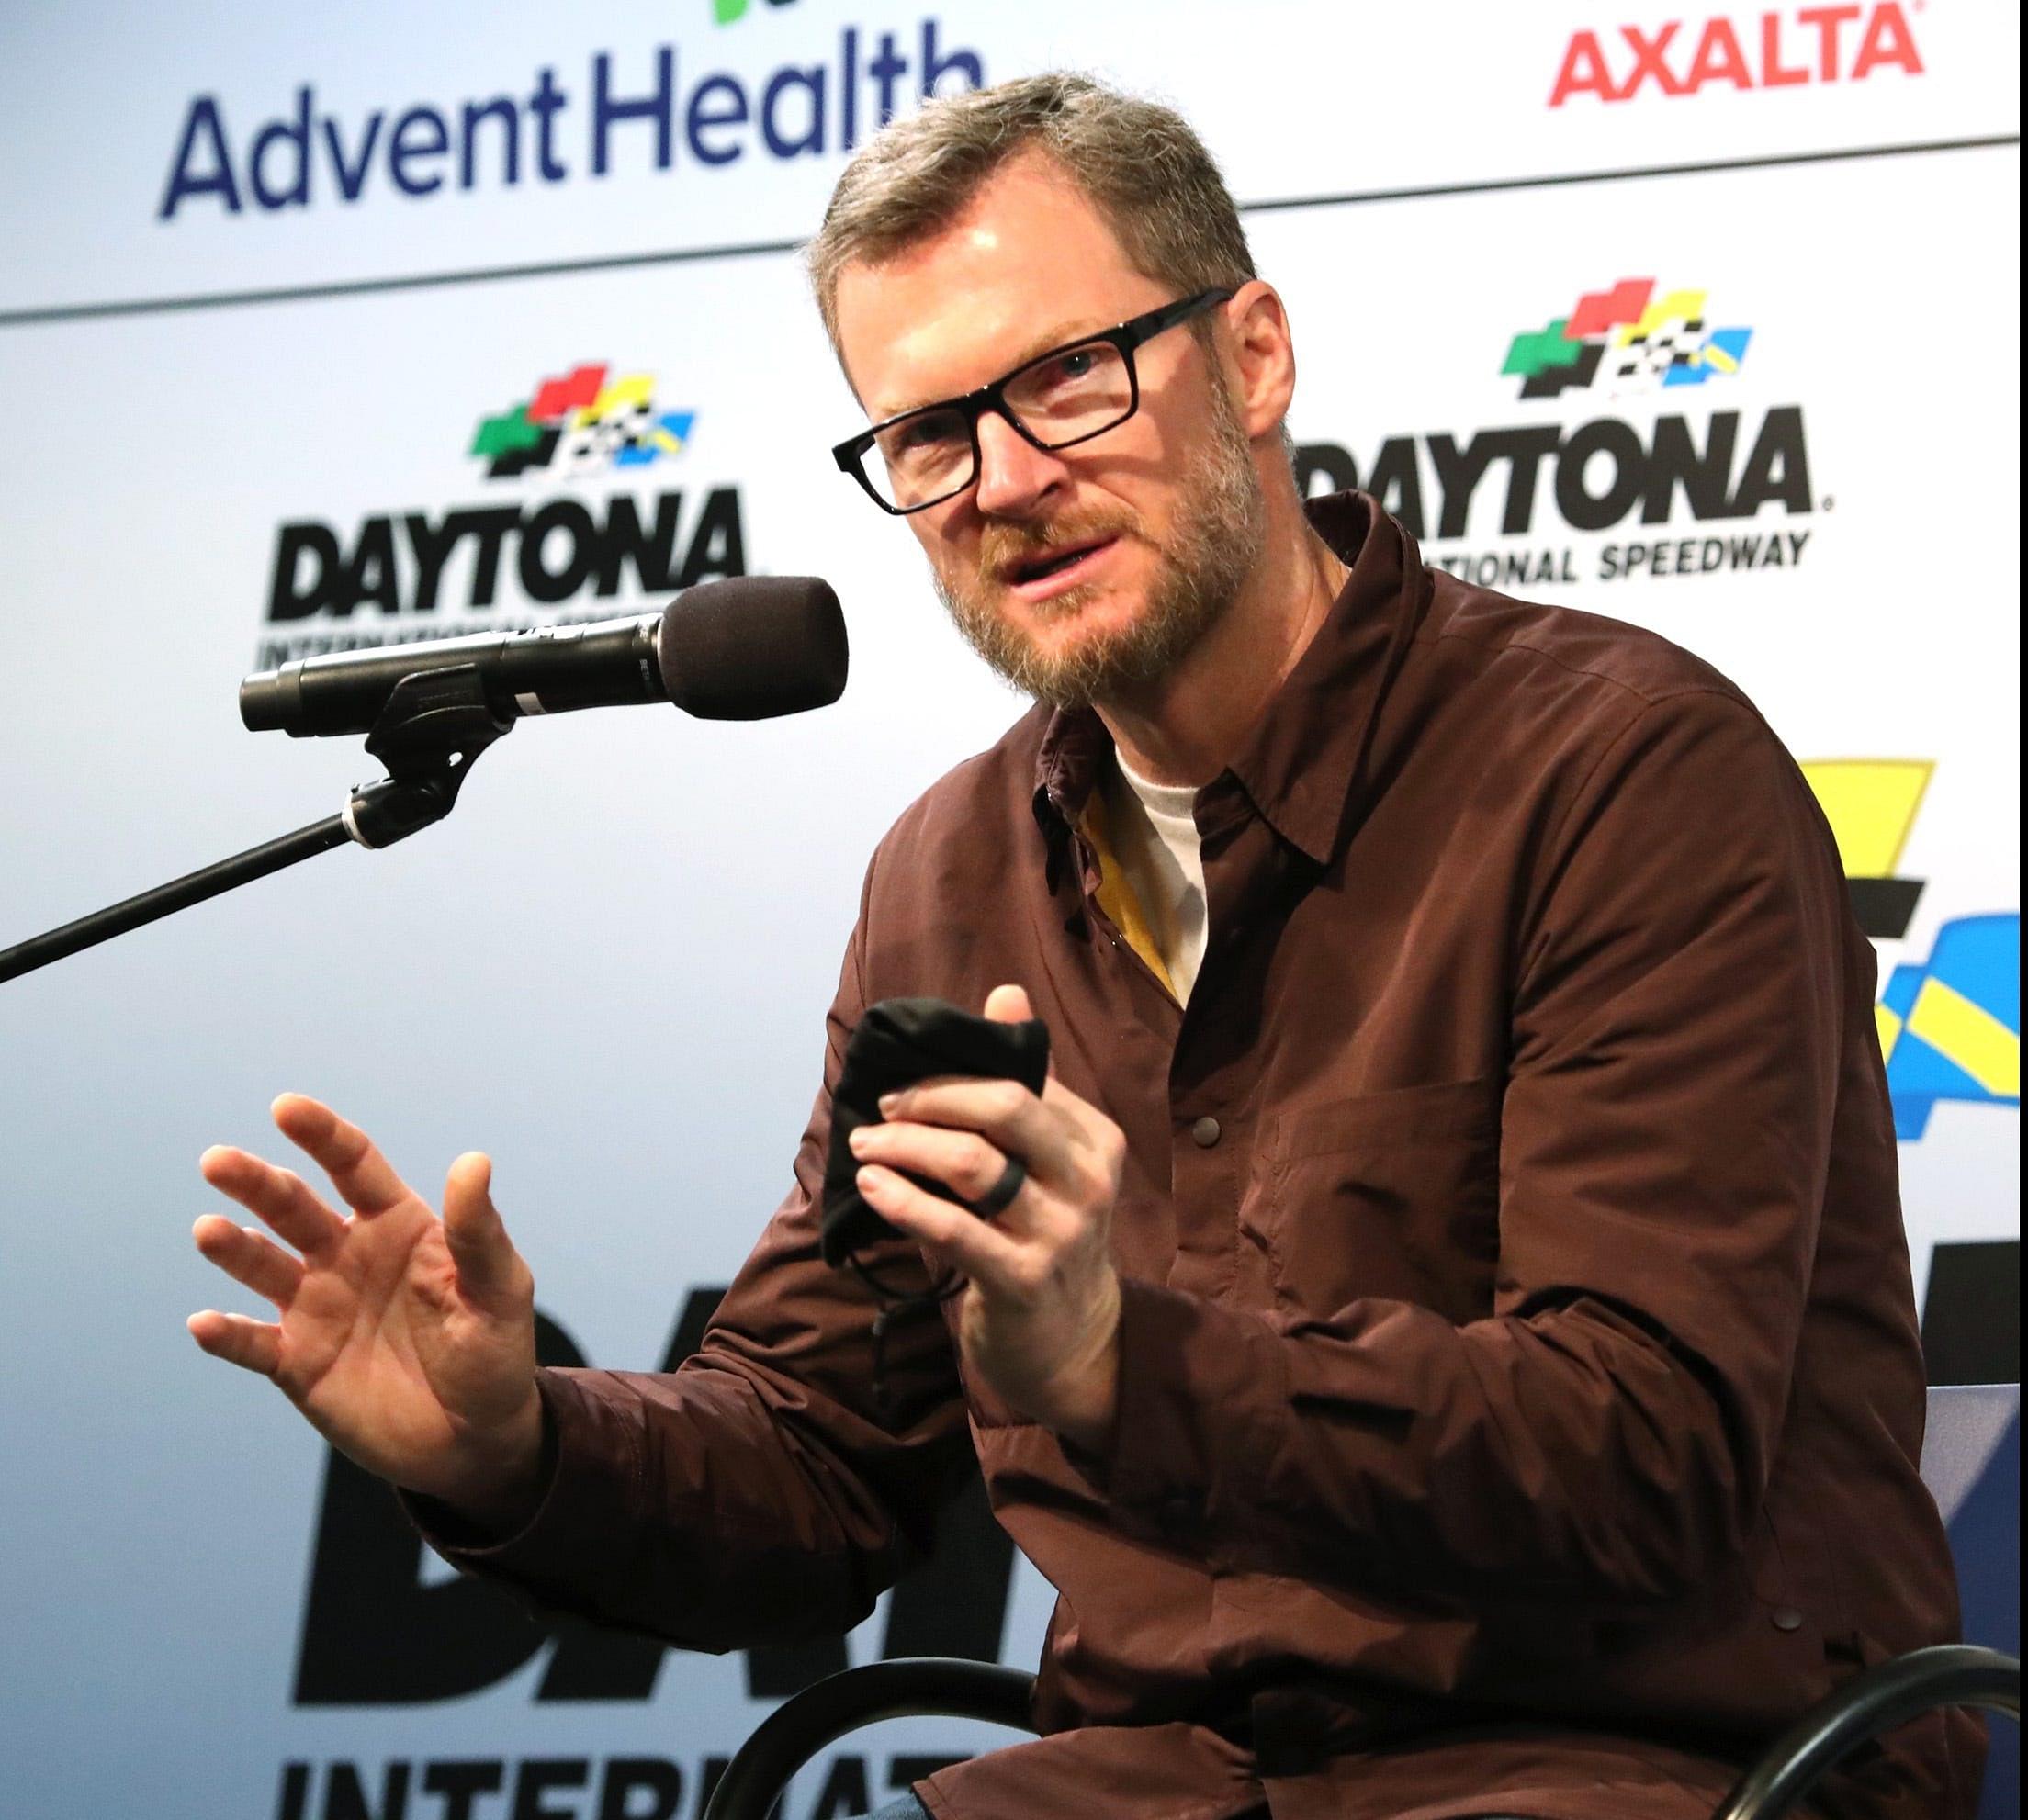 Dale Earnhardt Jr. Shoots Down Narrative of NASCAR Championship Drivers Being Soft This Year